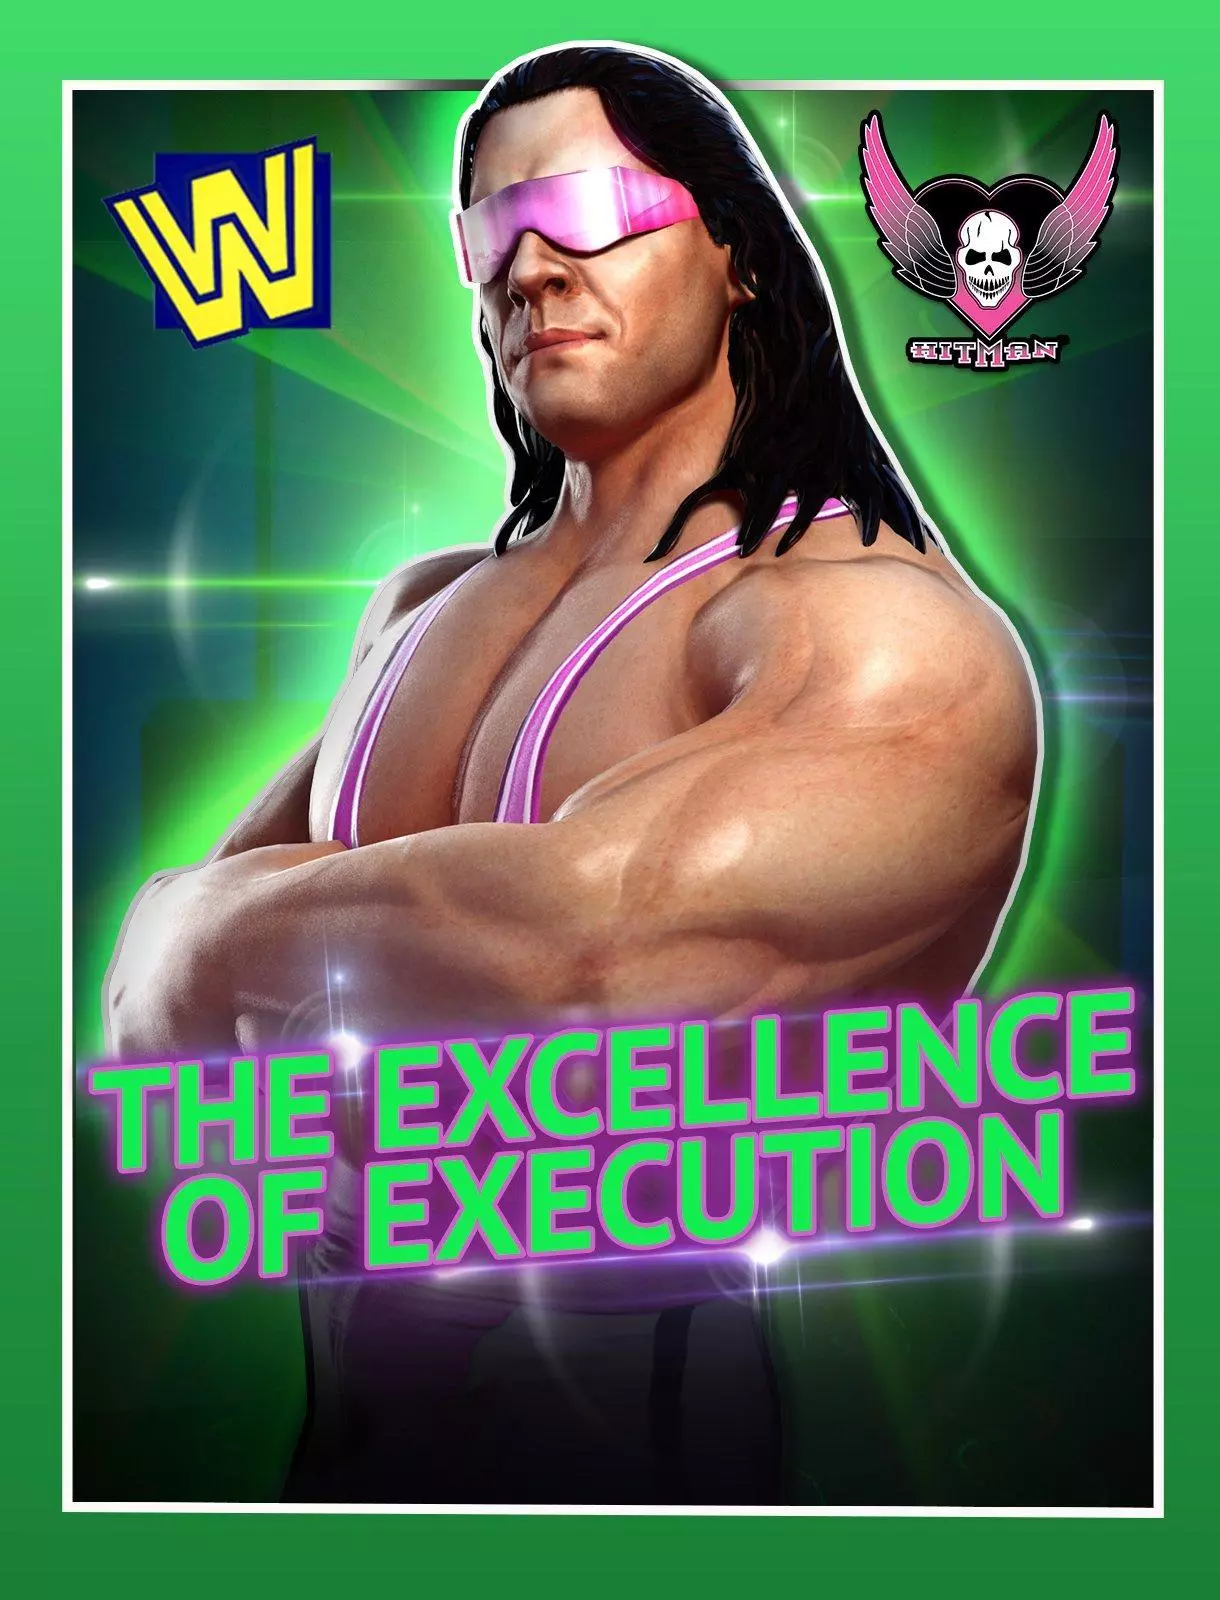 Bret Hart '93 - WWE Champions Roster Profile